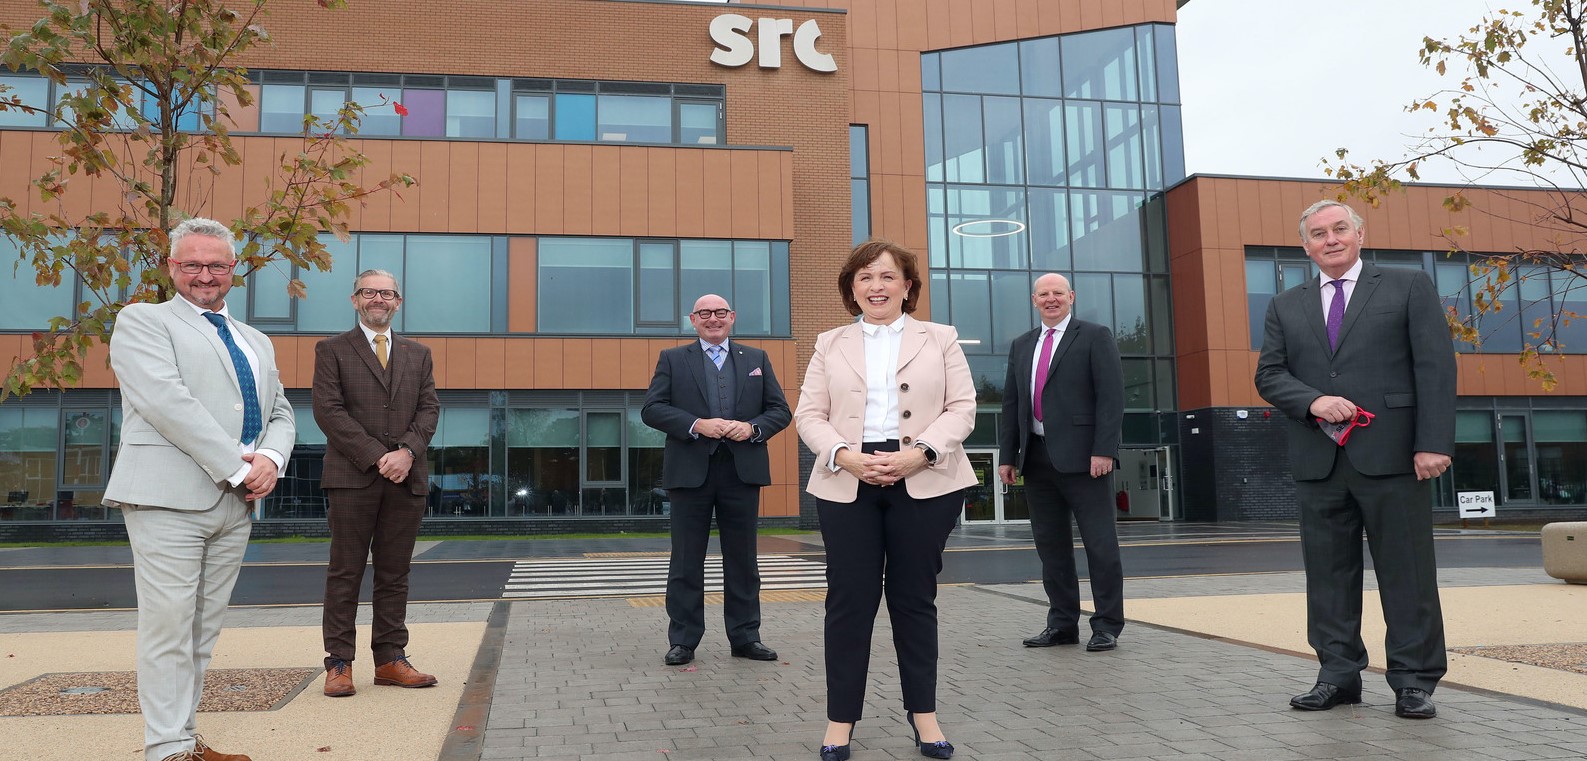 Pictured with the Economy Minister Diane Dodds (Centre) at Southern Regional College’s Banbridge campus are L-R: Professor Brian Murphy, Ulster University; Professor David Jones, Pro Vice-Chancellor for Education and Students at Queen's University; John D